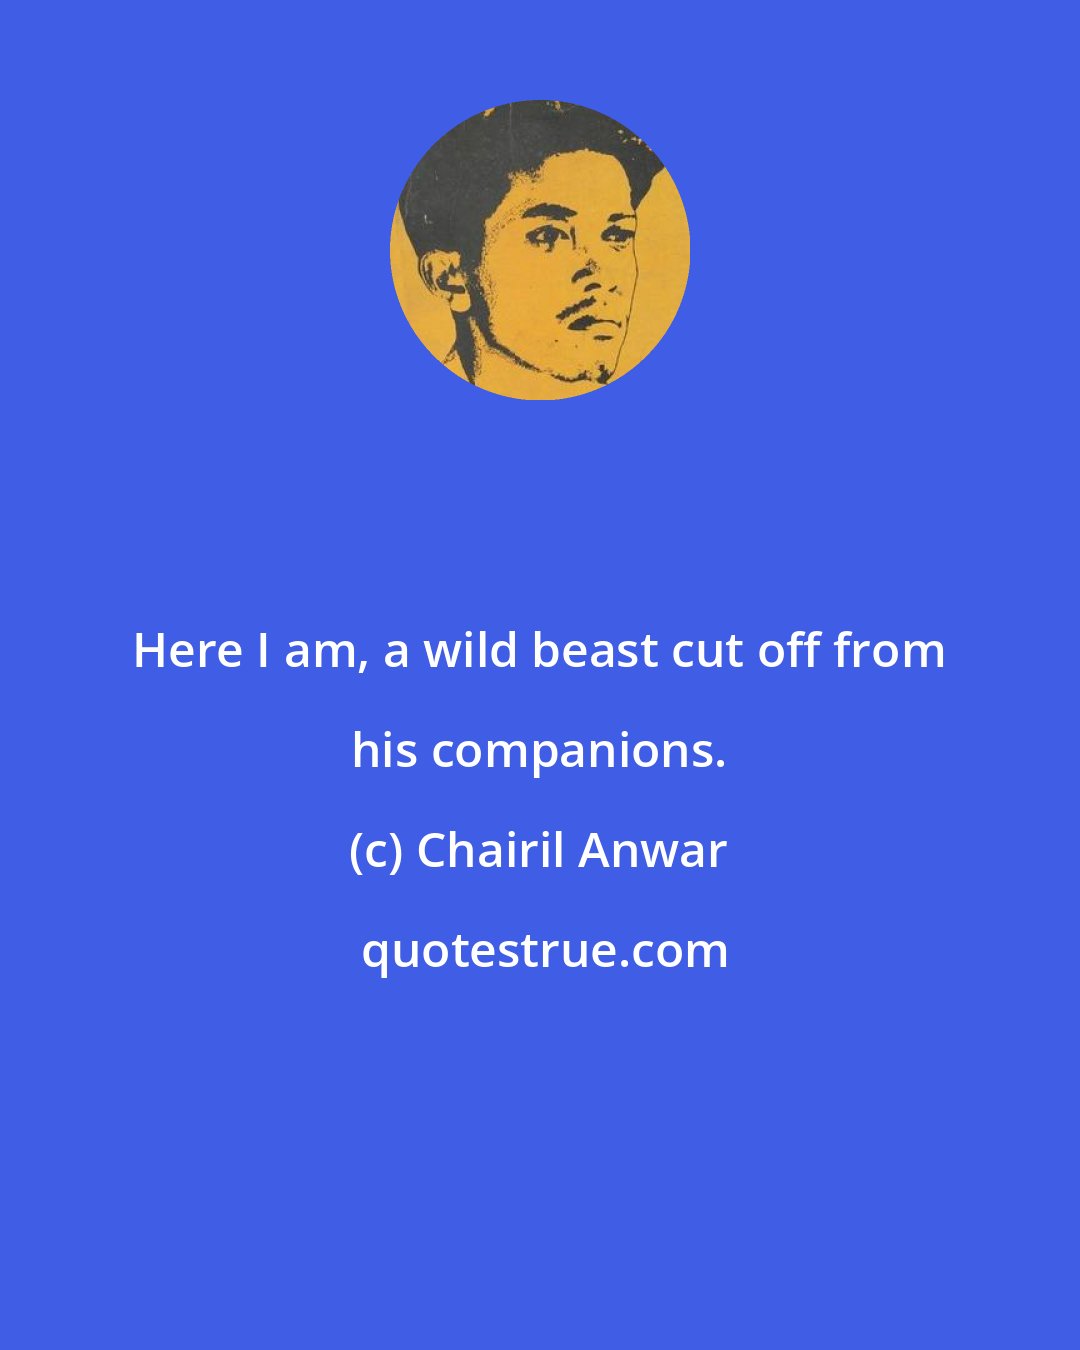 Chairil Anwar: Here I am, a wild beast cut off from his companions.